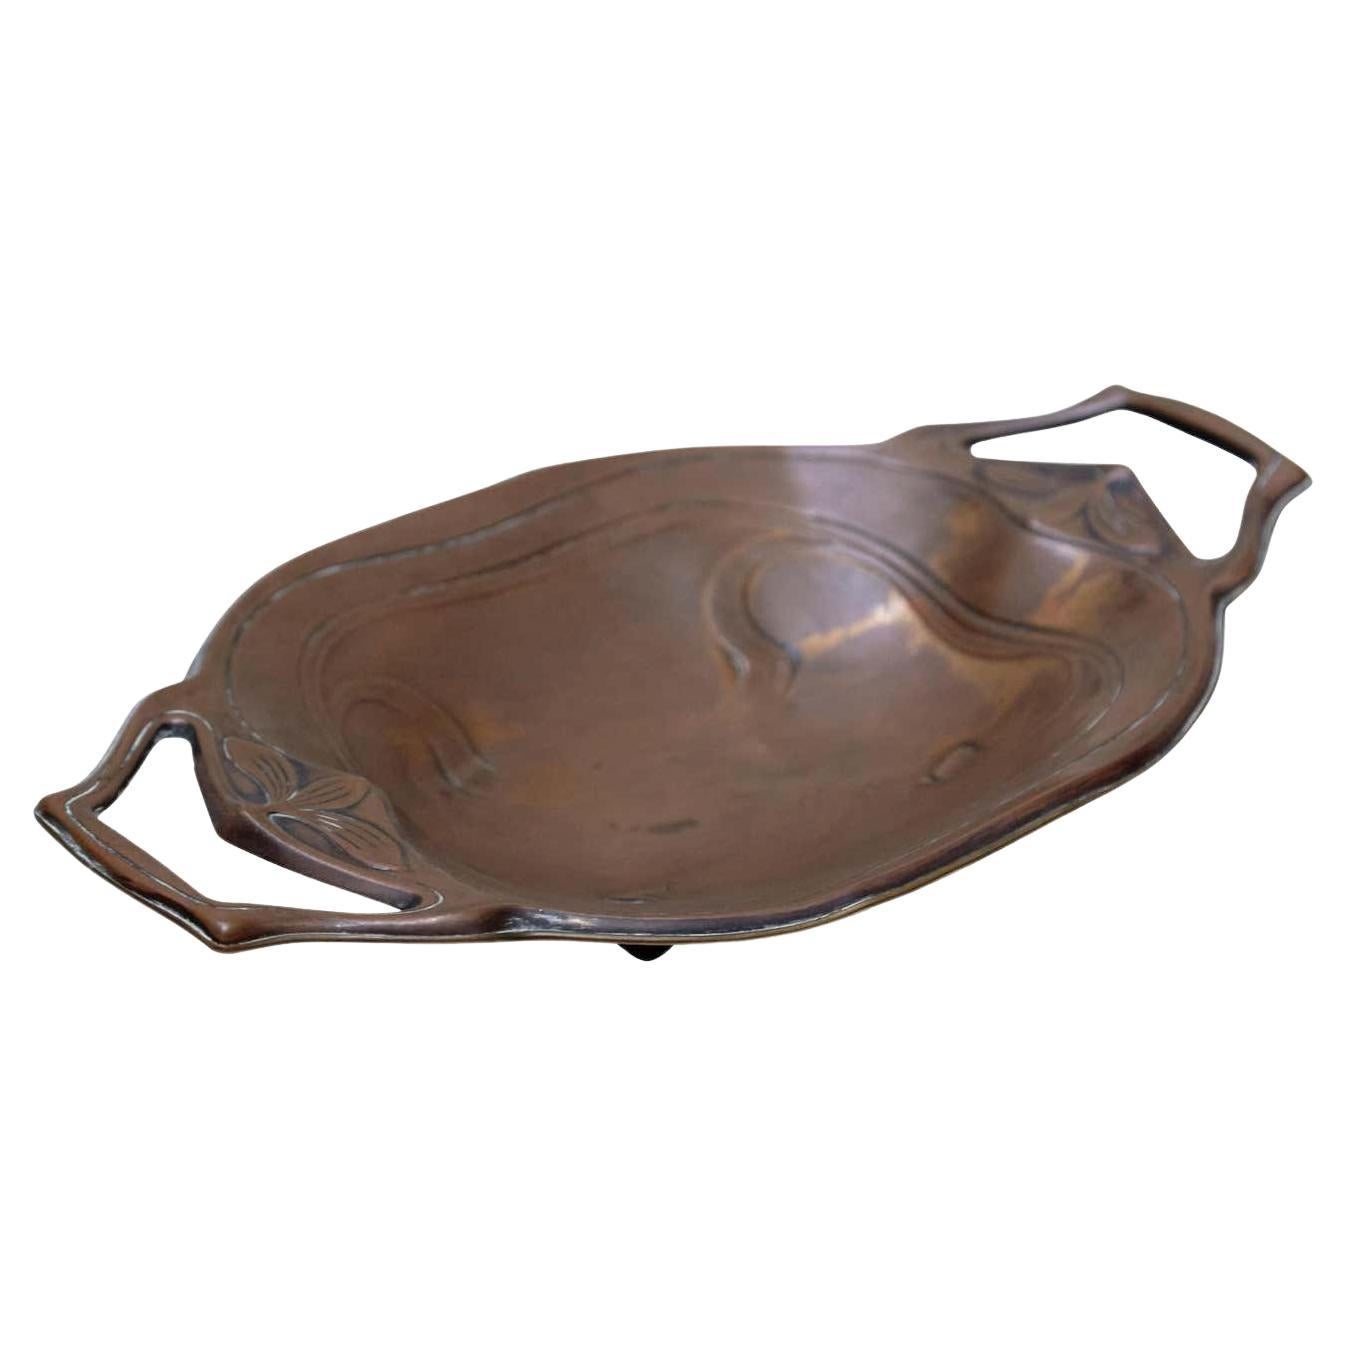 Catalan Modernist Copper Tray from Barcelona, circa 1920 For Sale